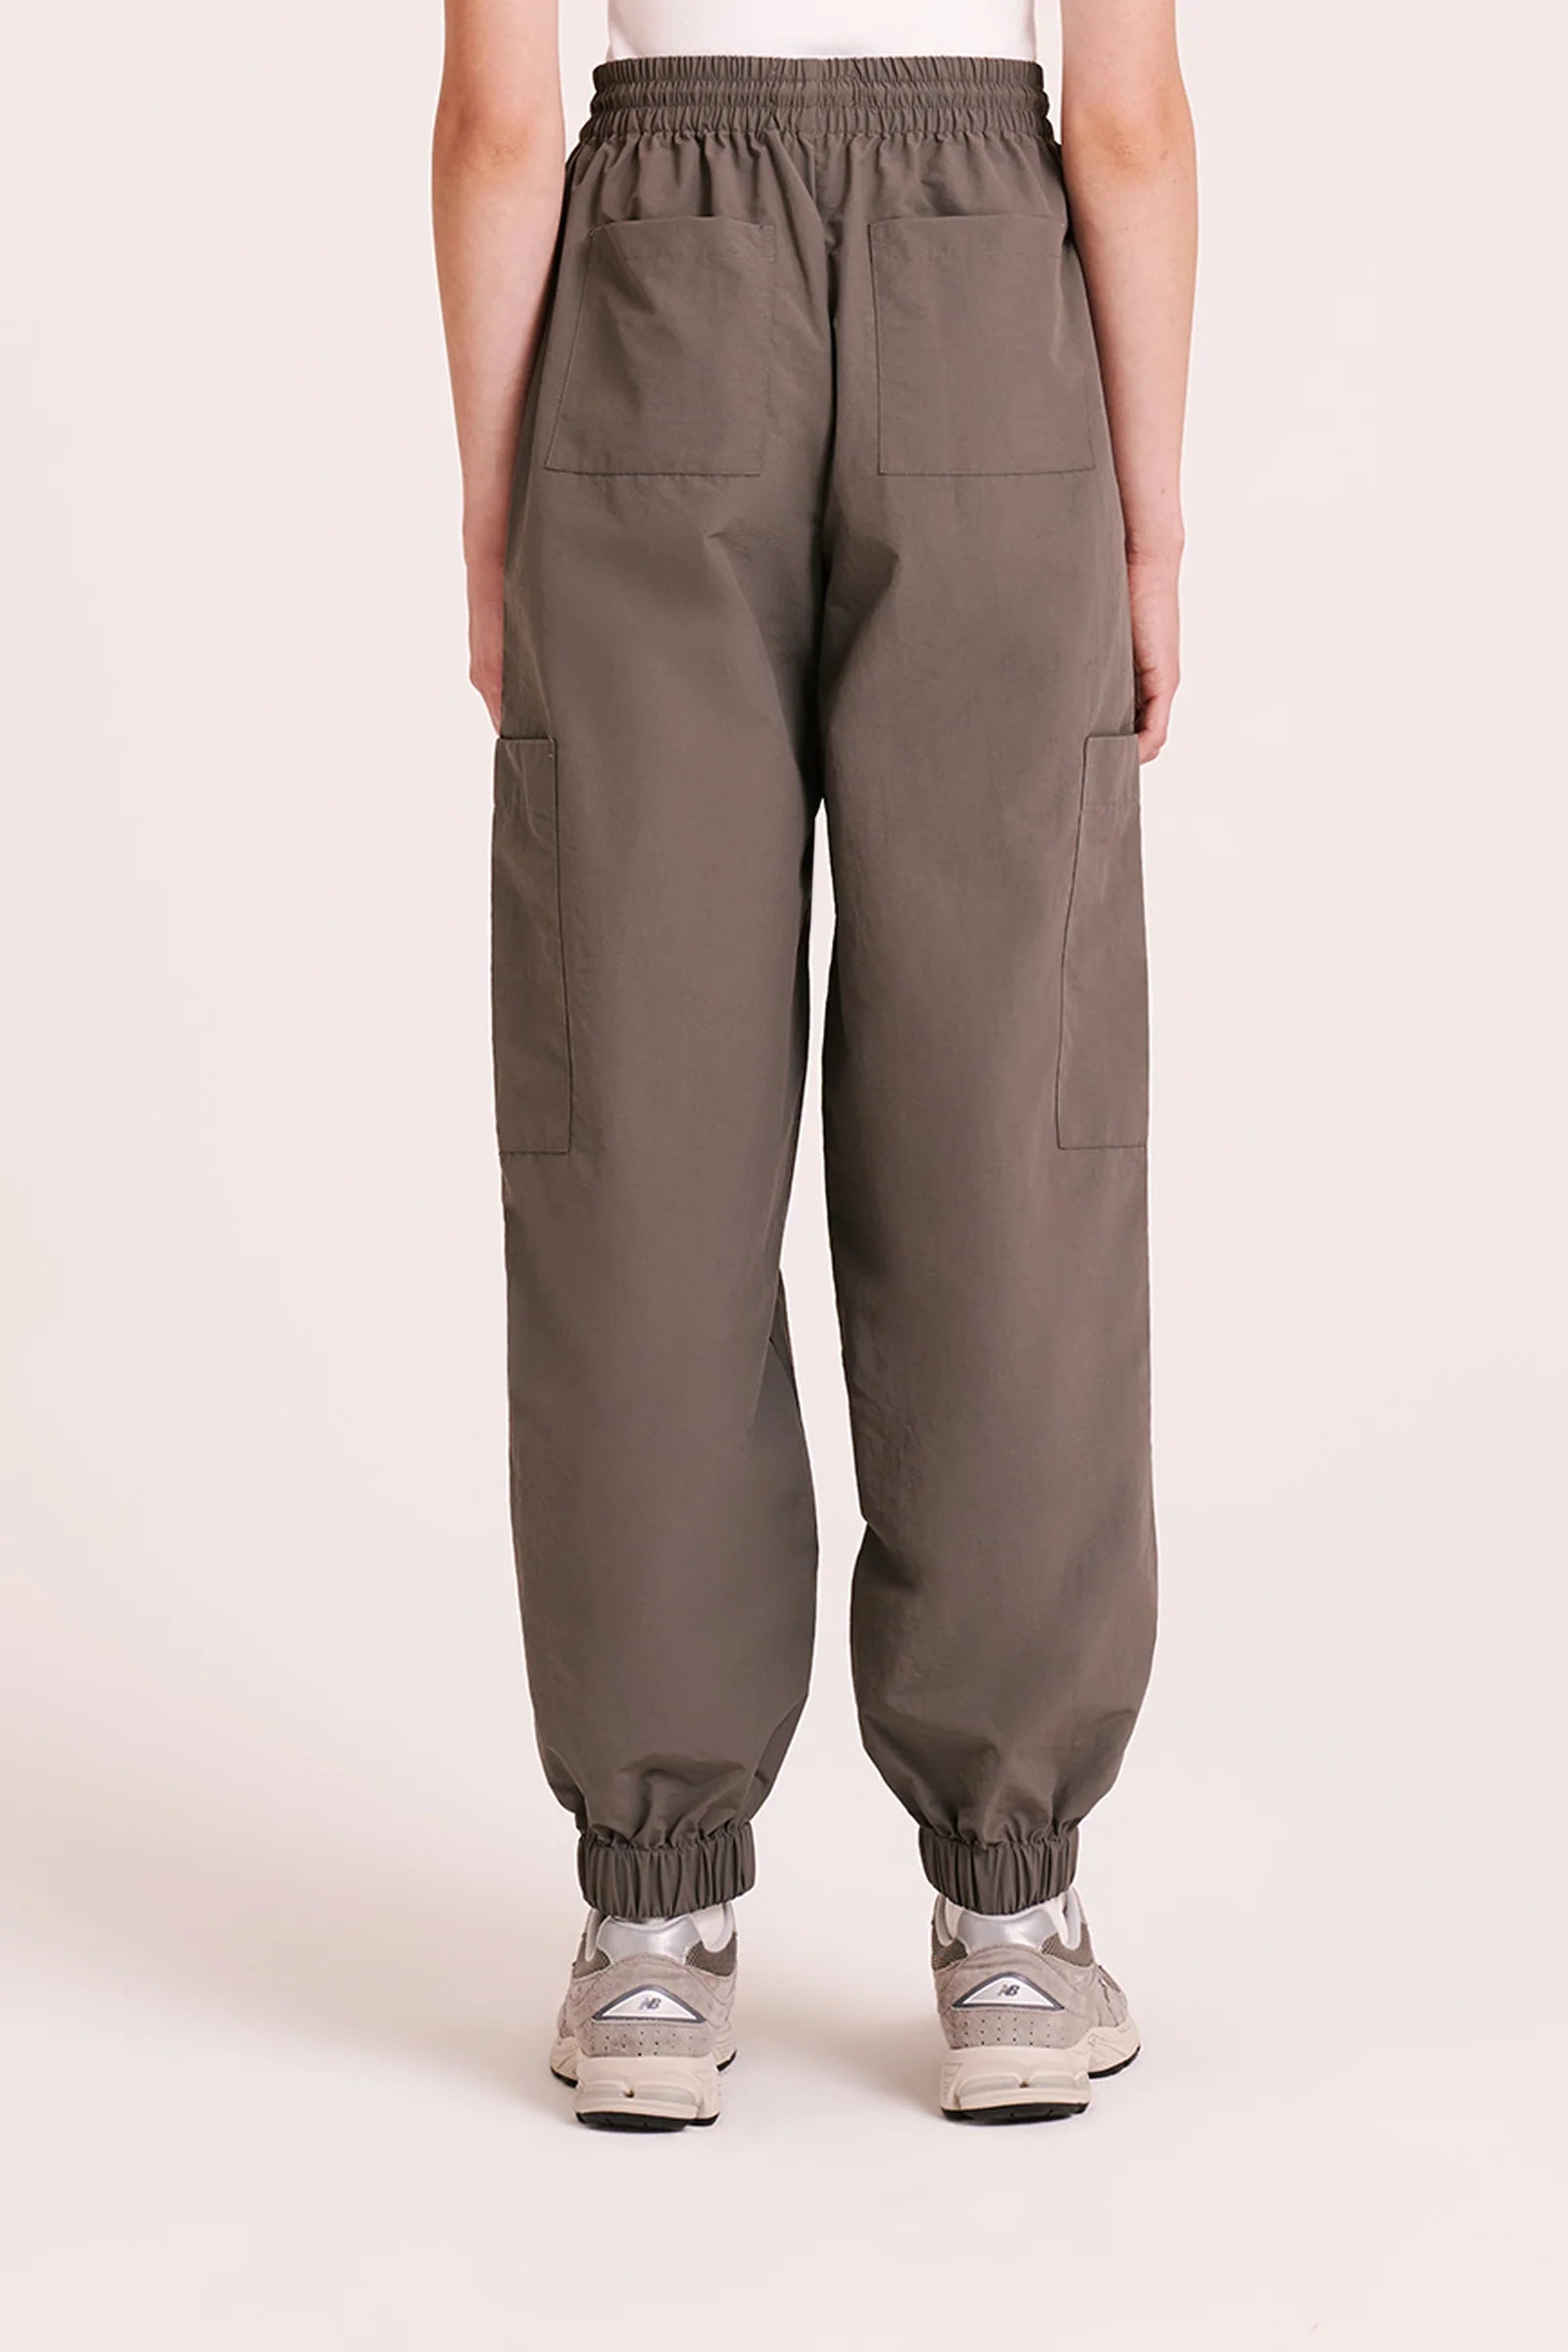 Nude Lucy | Presley Trackpant - Stilt